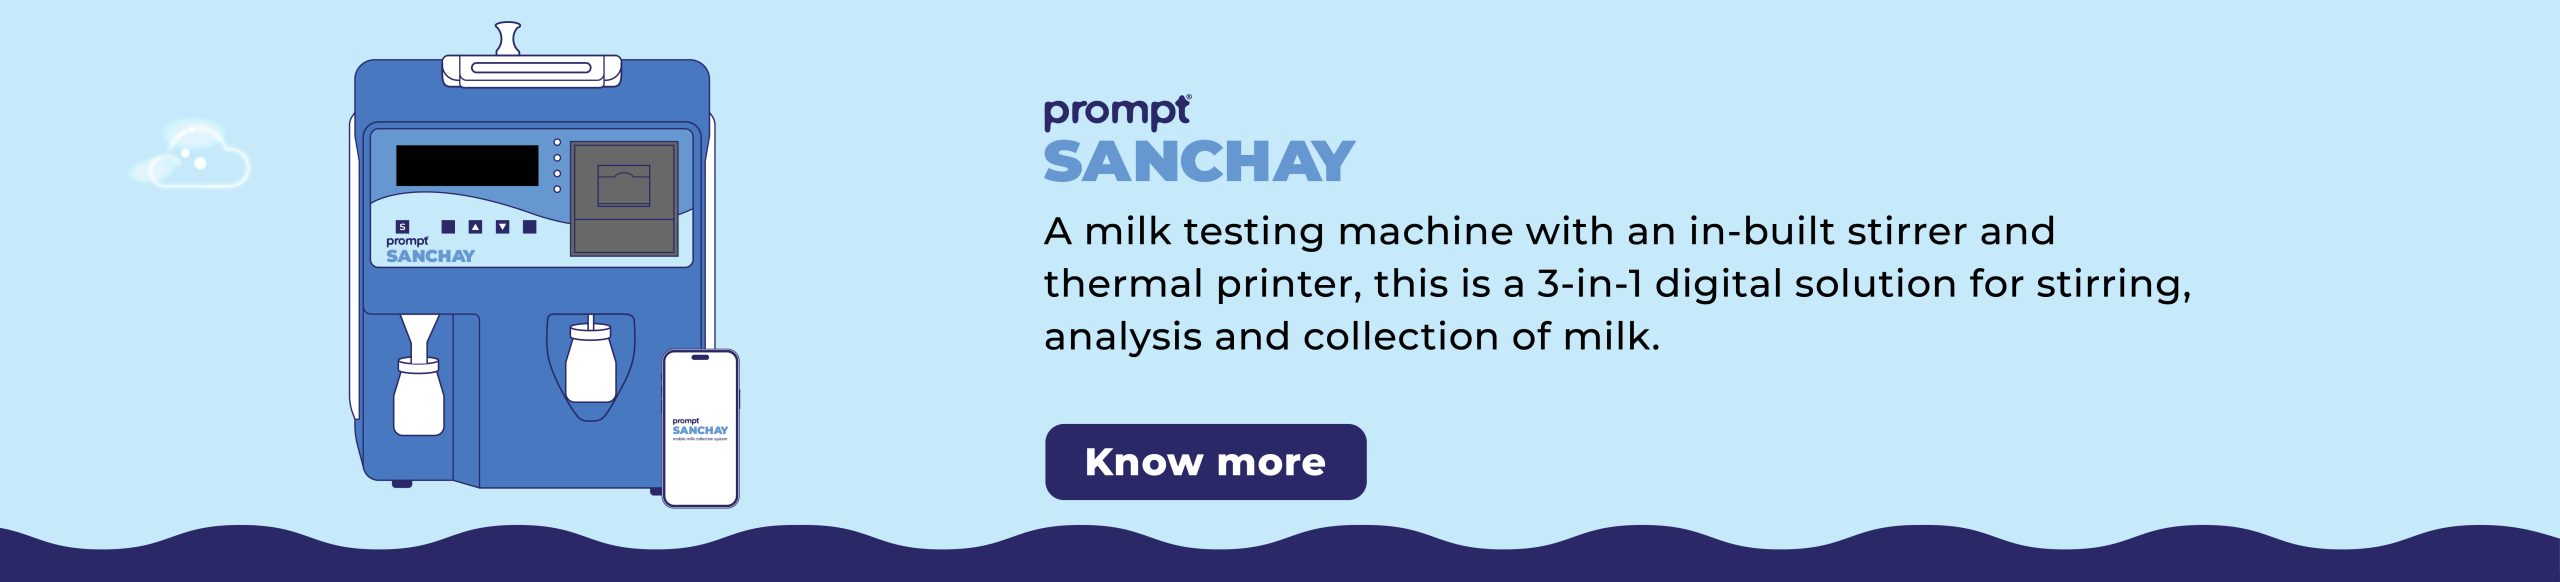 Prompt Sanchay for DairyTech Africa